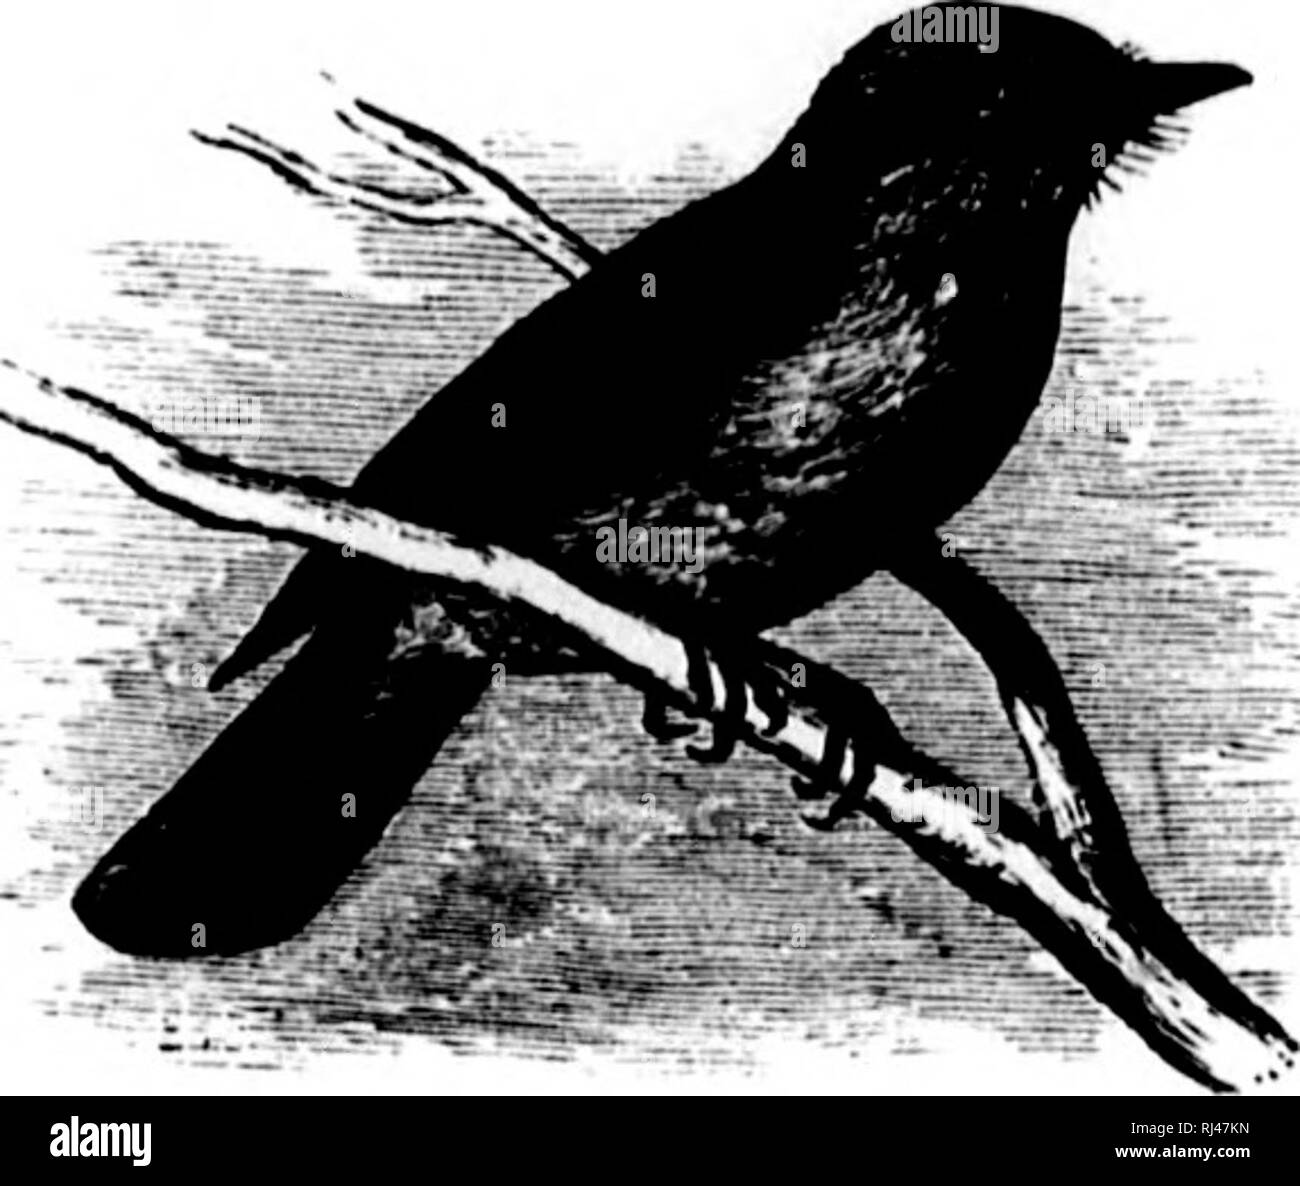 . A history of North American birds [microform] : land birds. Birds; Ornithology; Oiseaux; Ornithologie. 388 X(MITII AMERICAN BIRDS. dull white towards tho edges. Female siniilai-, without tliy crest; the crown brown, like the buck ; the under parts whitish anteriorly, streaked with brown ; behind white, tinged with red or oehraeeoiis. Length of male about o.oO ; wing, .'!.2'); tail, 2.7.&quot;). Yuuiiq resenibhng the f'euiule, but lacking any trace of red, and with each feather of the upper parts liordered with whititih, producing a very variegated appearance. IIah. A'alleys of Rio Urande and Stock Photo